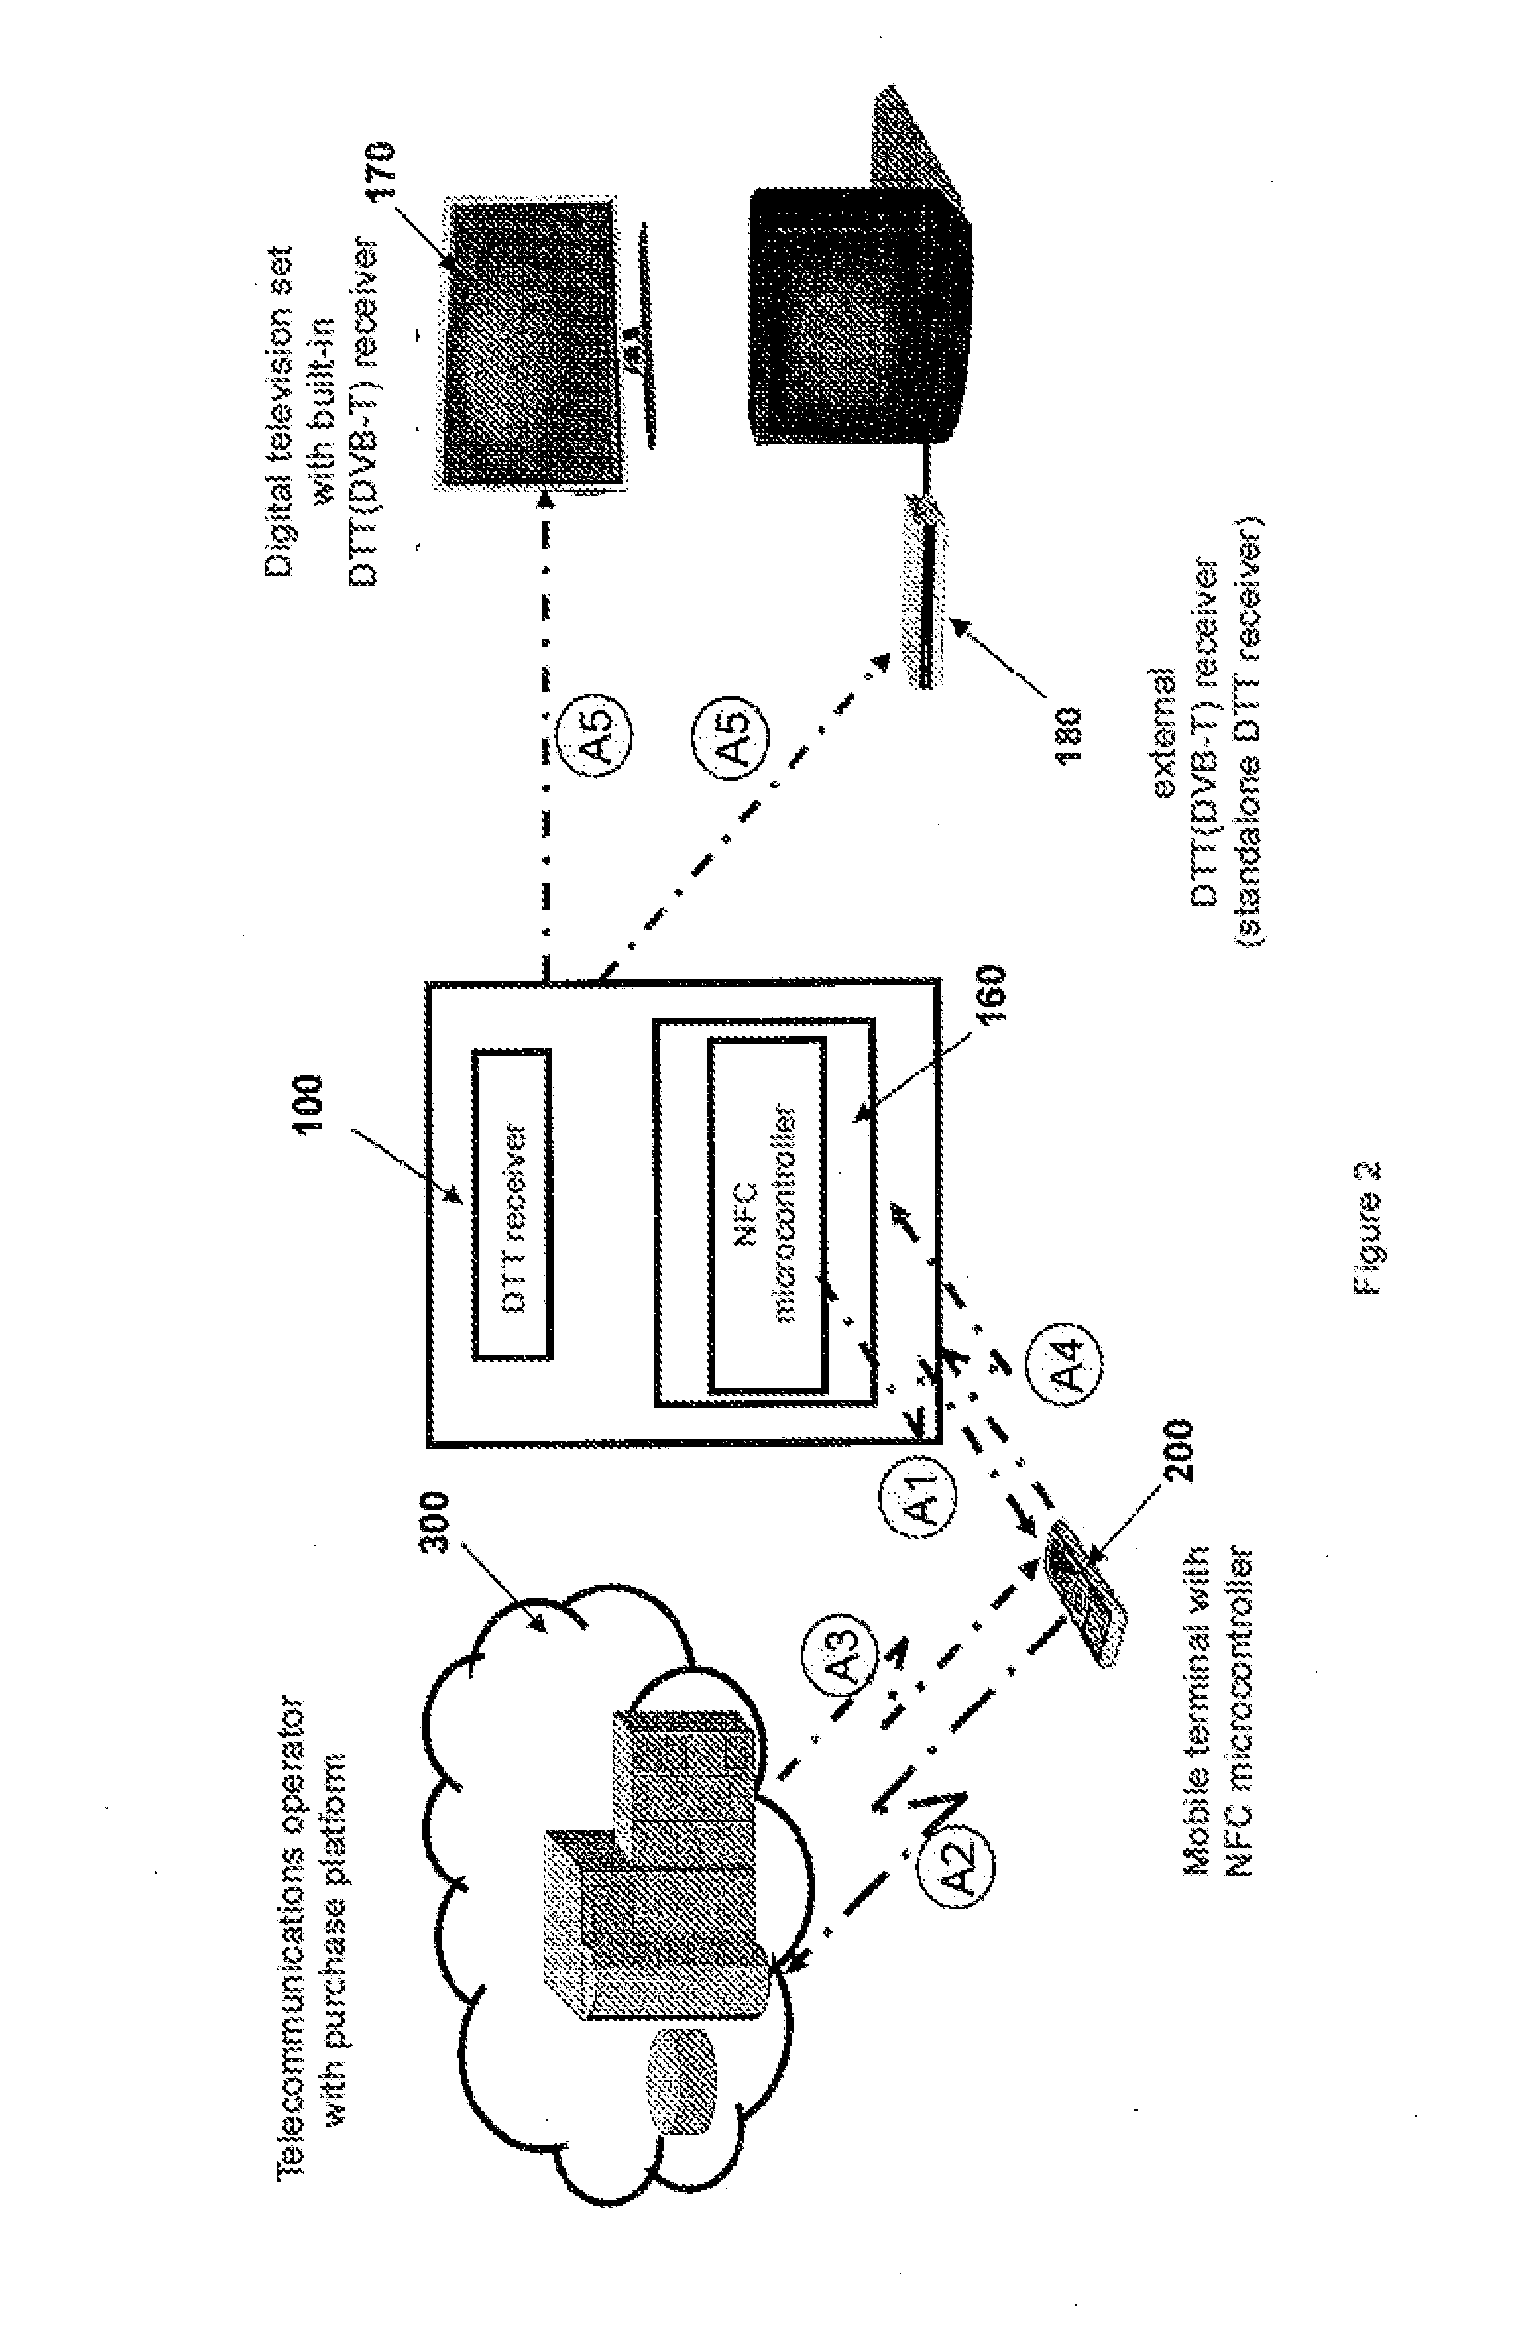 System and method for controlling access to contents